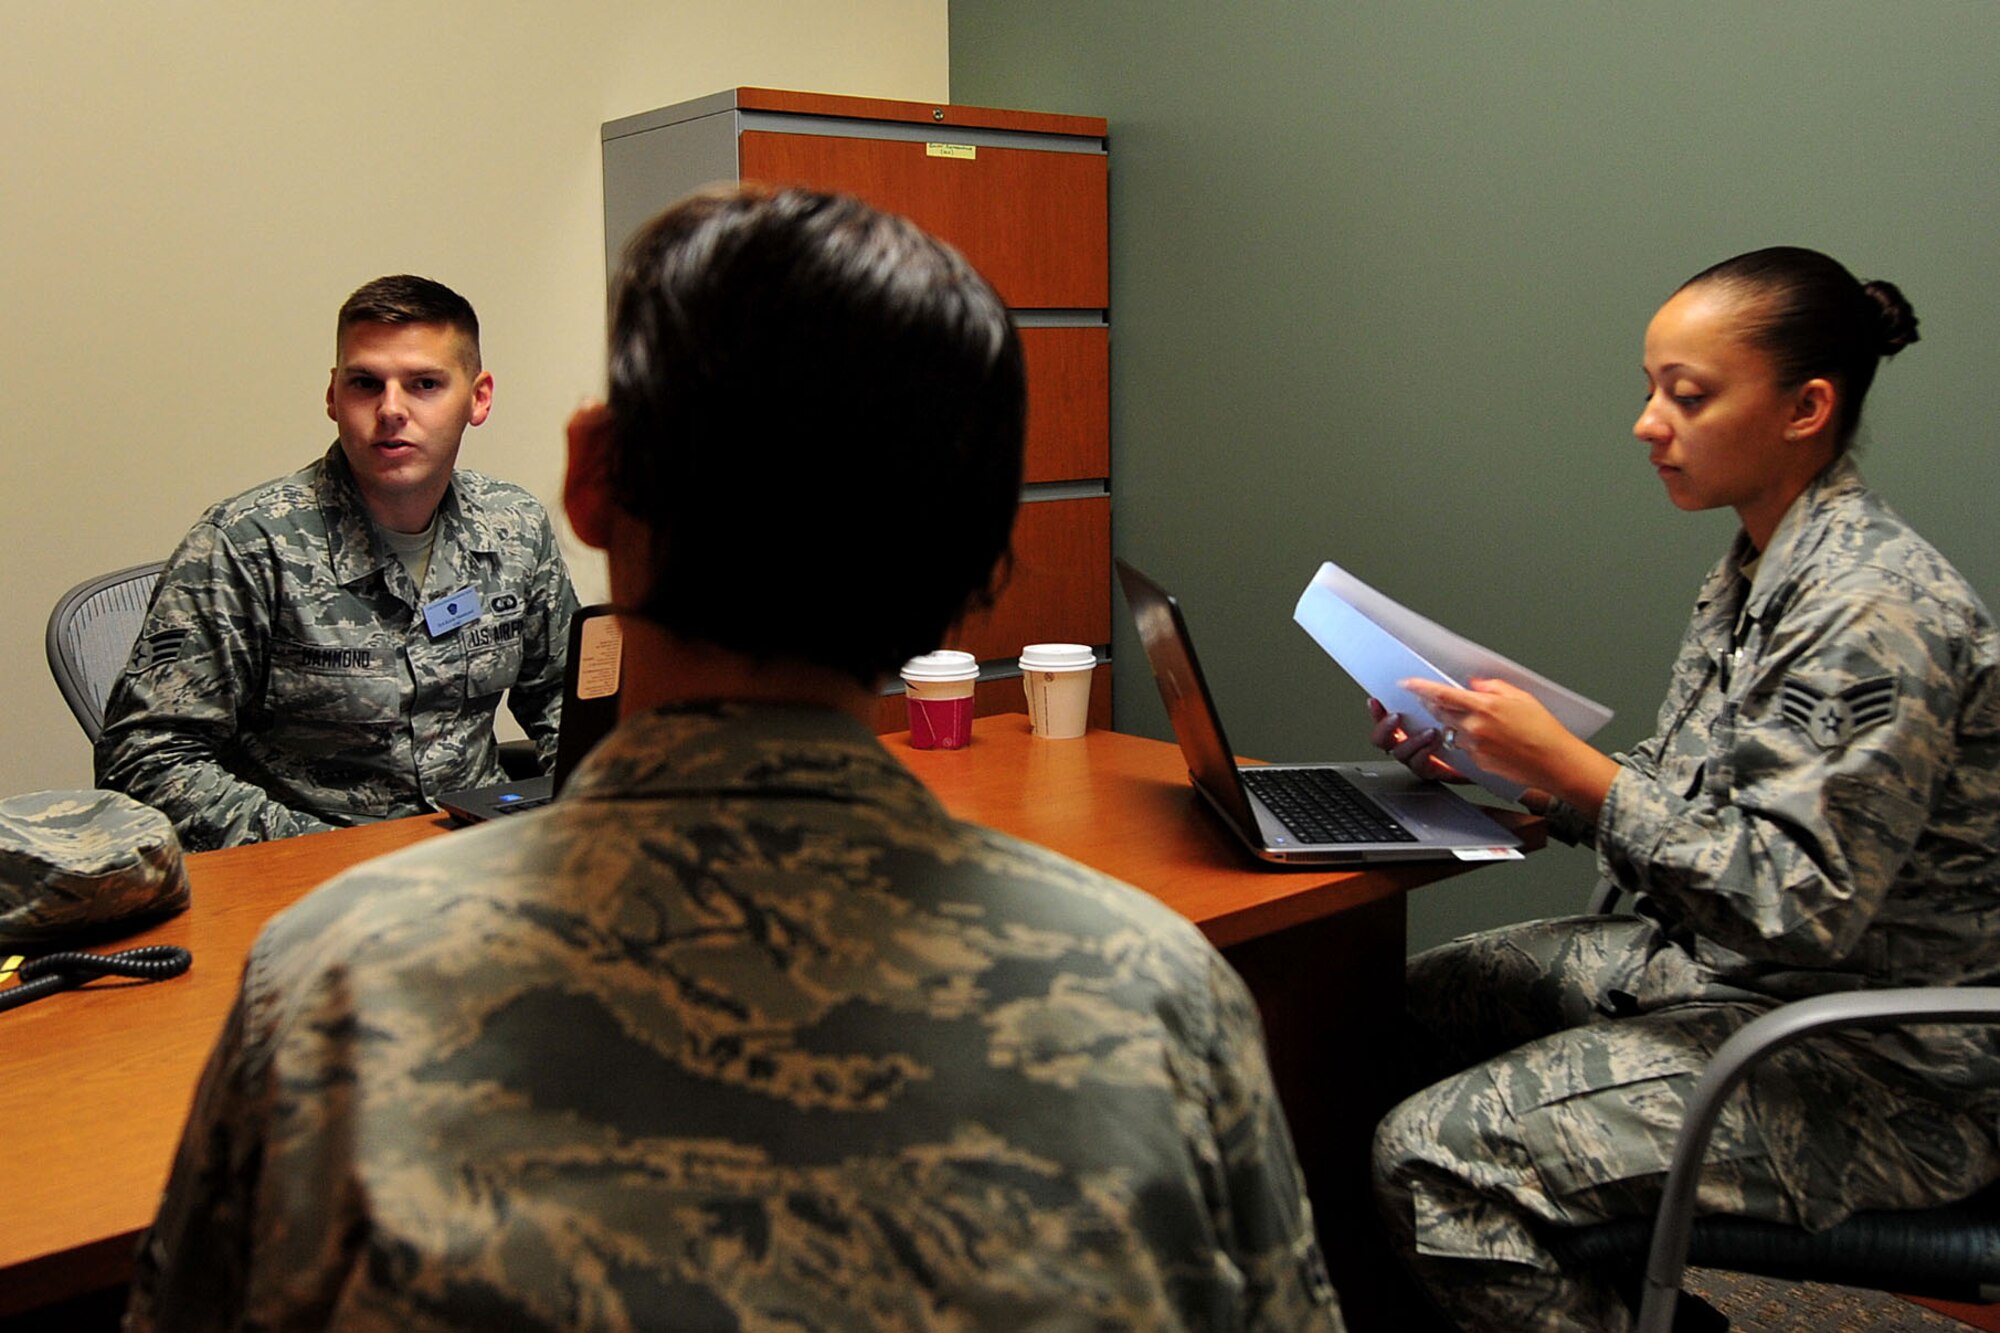 U.S. Air Force Senior Airman Kevin Hammond, left, and Senior Airman Therysa King, right, Air Force Chief of Staff Revitalizing Air Force Squadrons team members, brief a survey participant at Shaw Air Force Base, S.C., July 25, 2017. Team members held peer-to-peer interviews and focus groups to receive feedback from Shaw Airmen regarding CSAF Gen. David L. Goldfein’s primary focus of revitalizing squadrons as the Air Force’s core fighting unit. (U.S. Air Force photo by Airman 1st Class Kathryn R.C. Reaves)